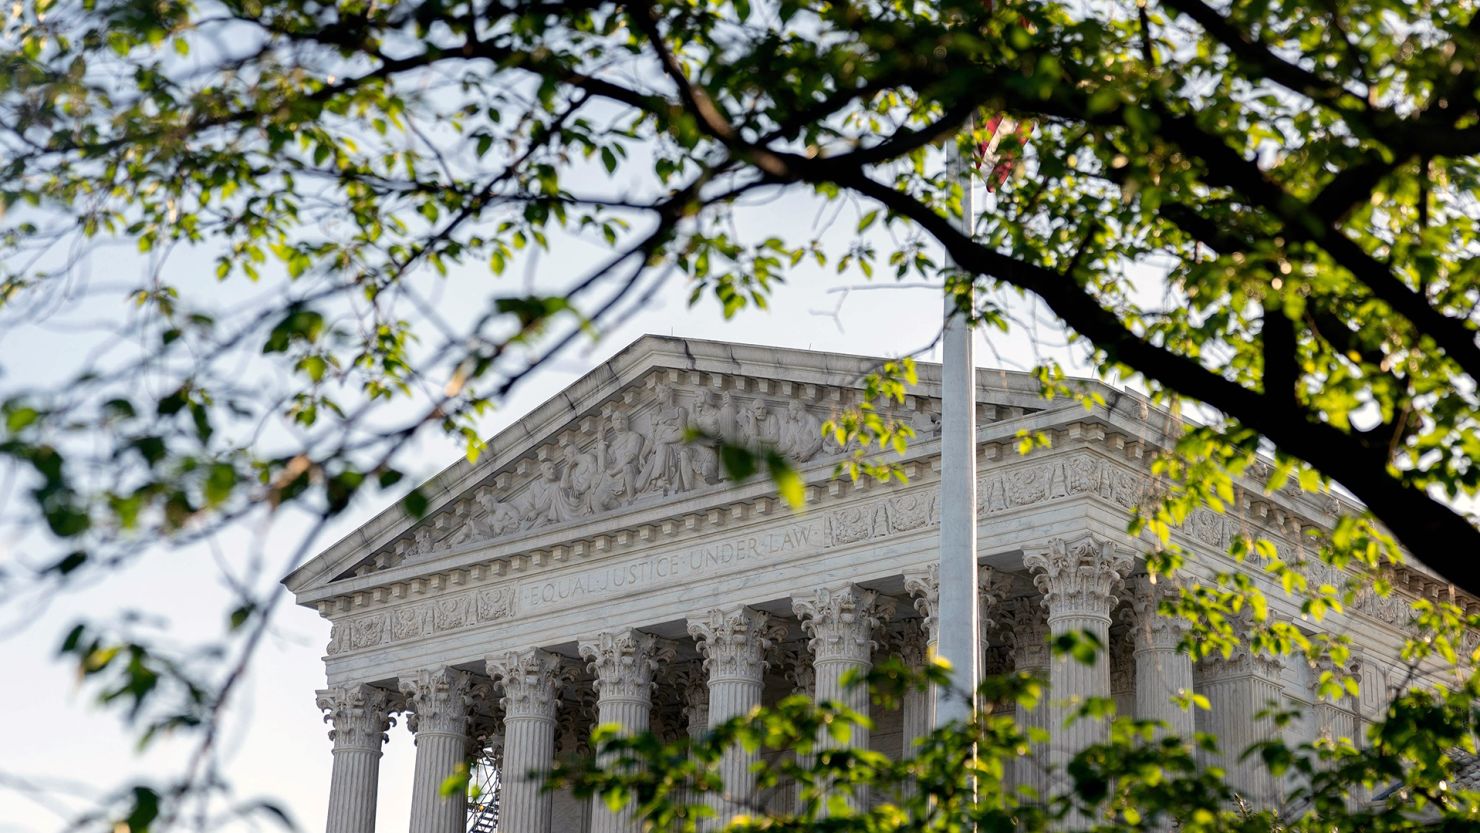 READ: The Supreme Court’s order on medication abortion and Samuel Alito ...